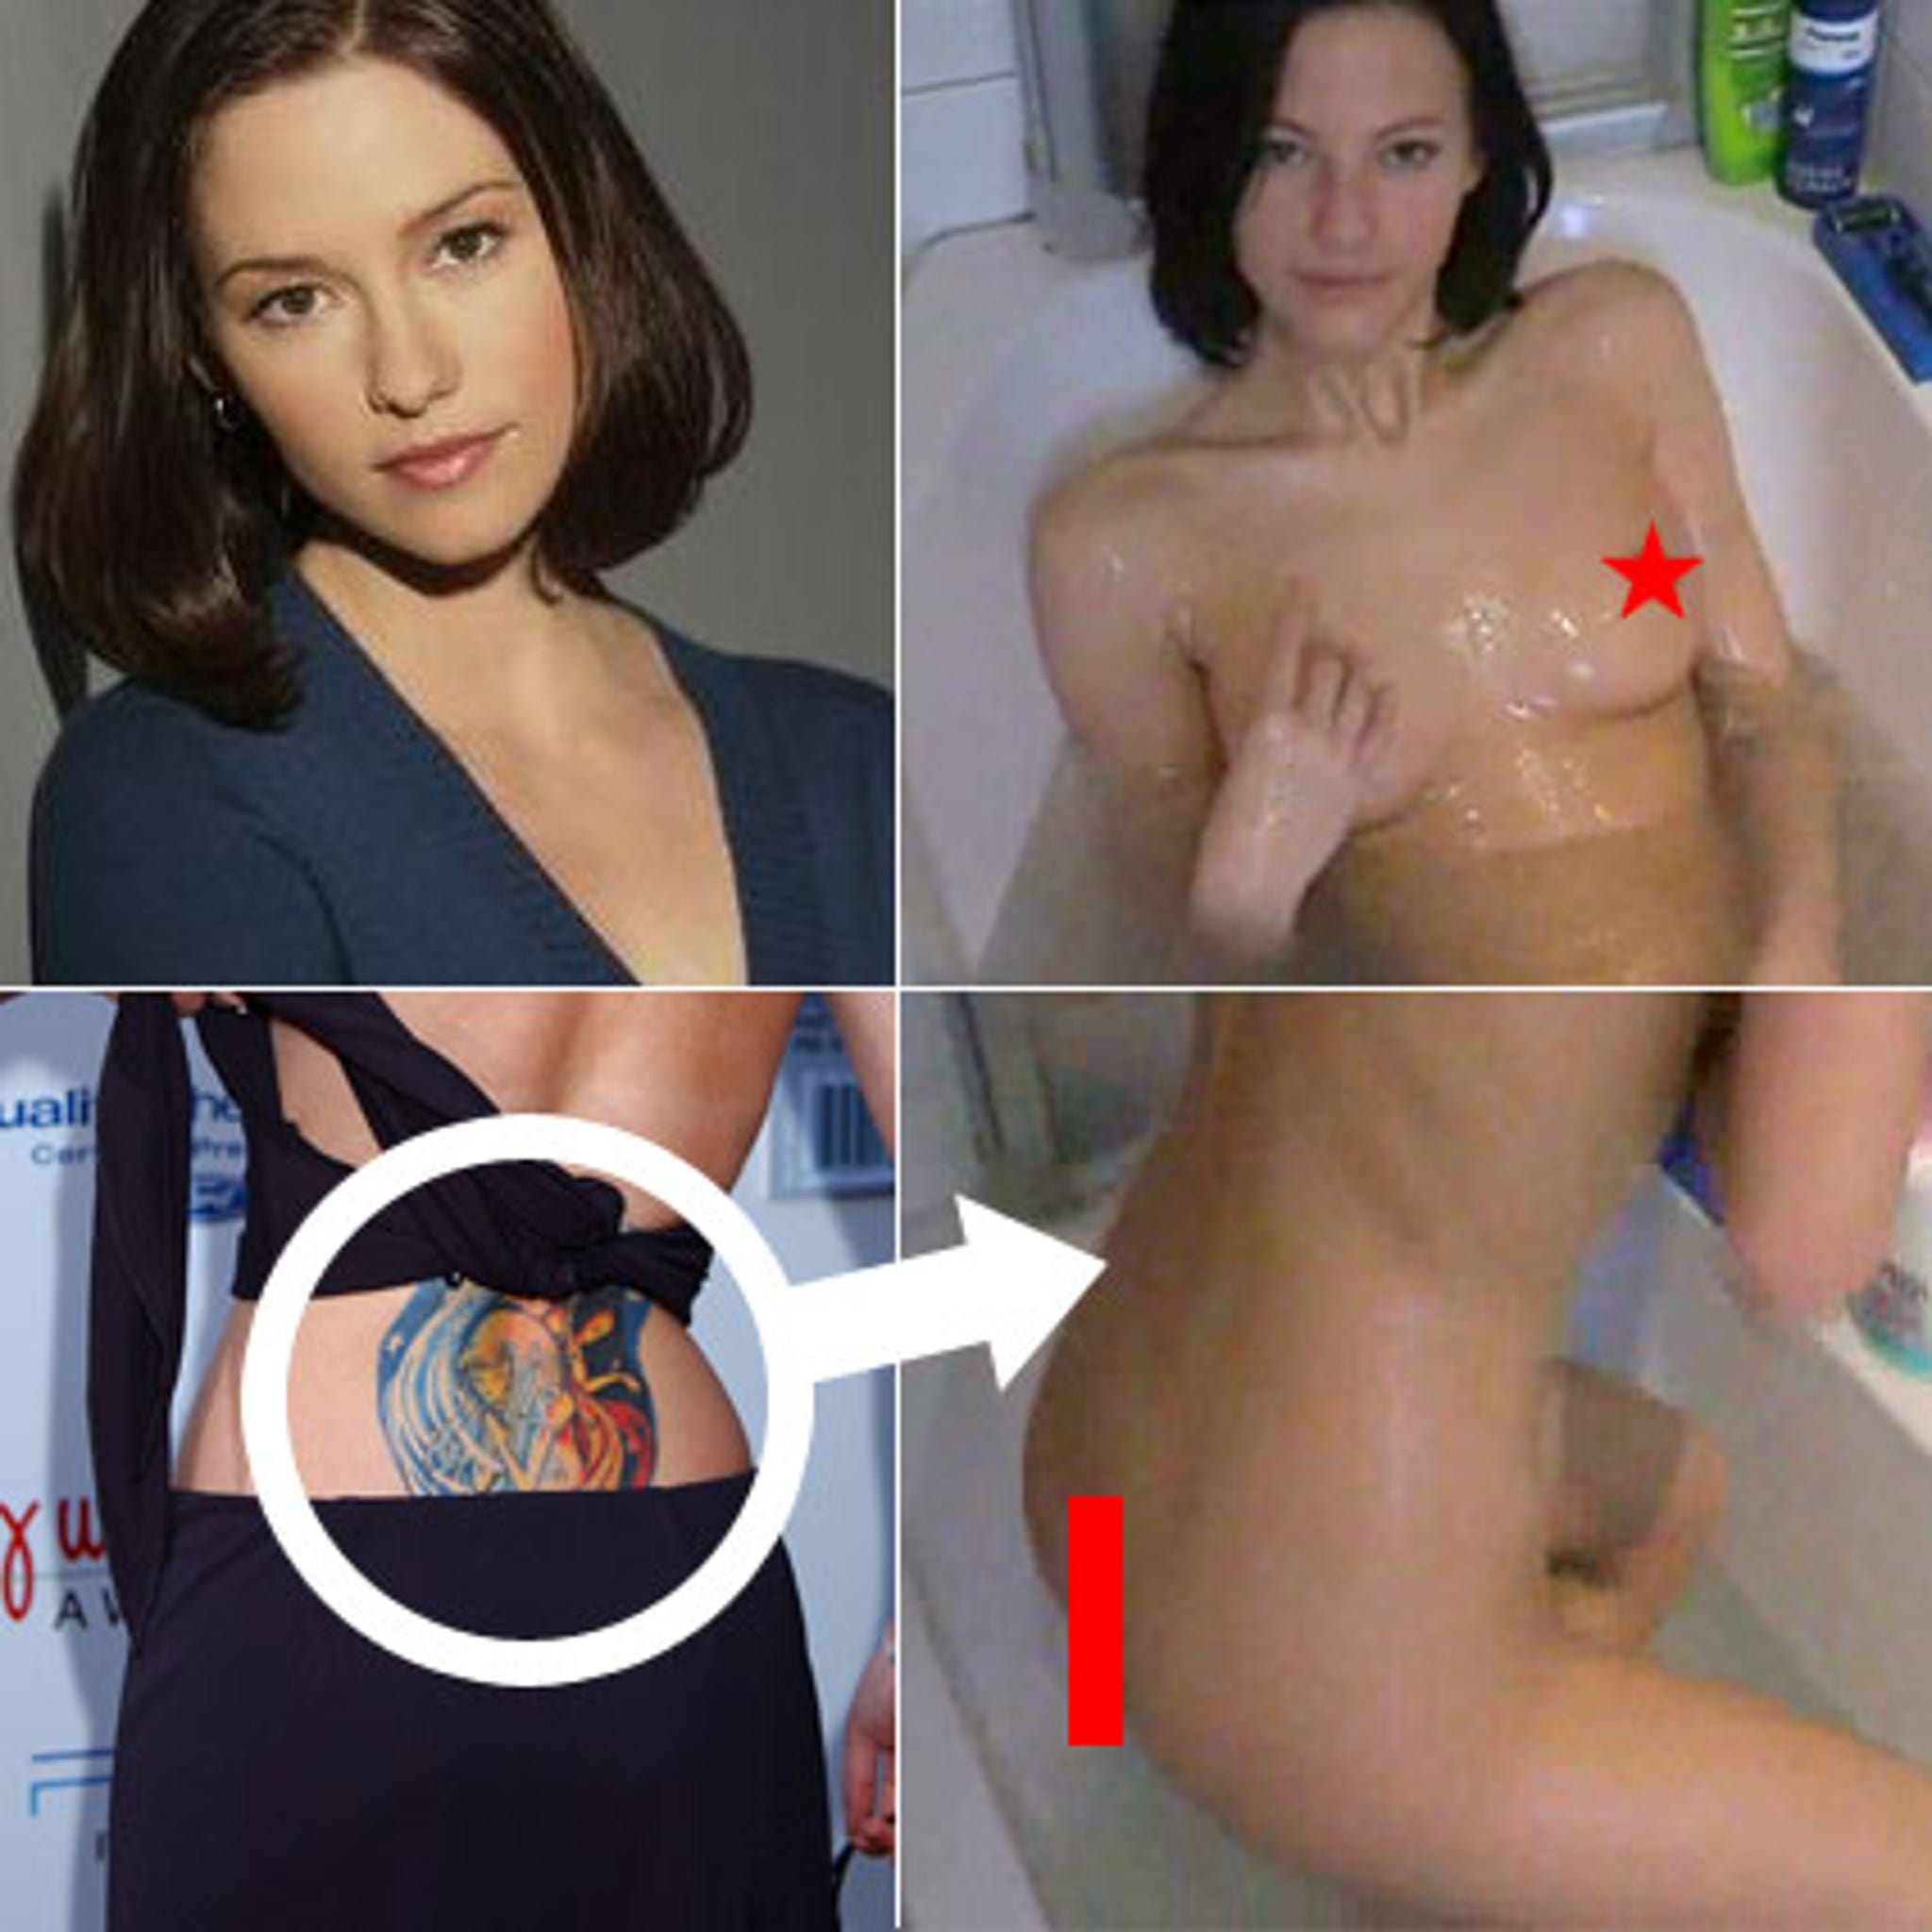 Leigh nide chyler The Transformation